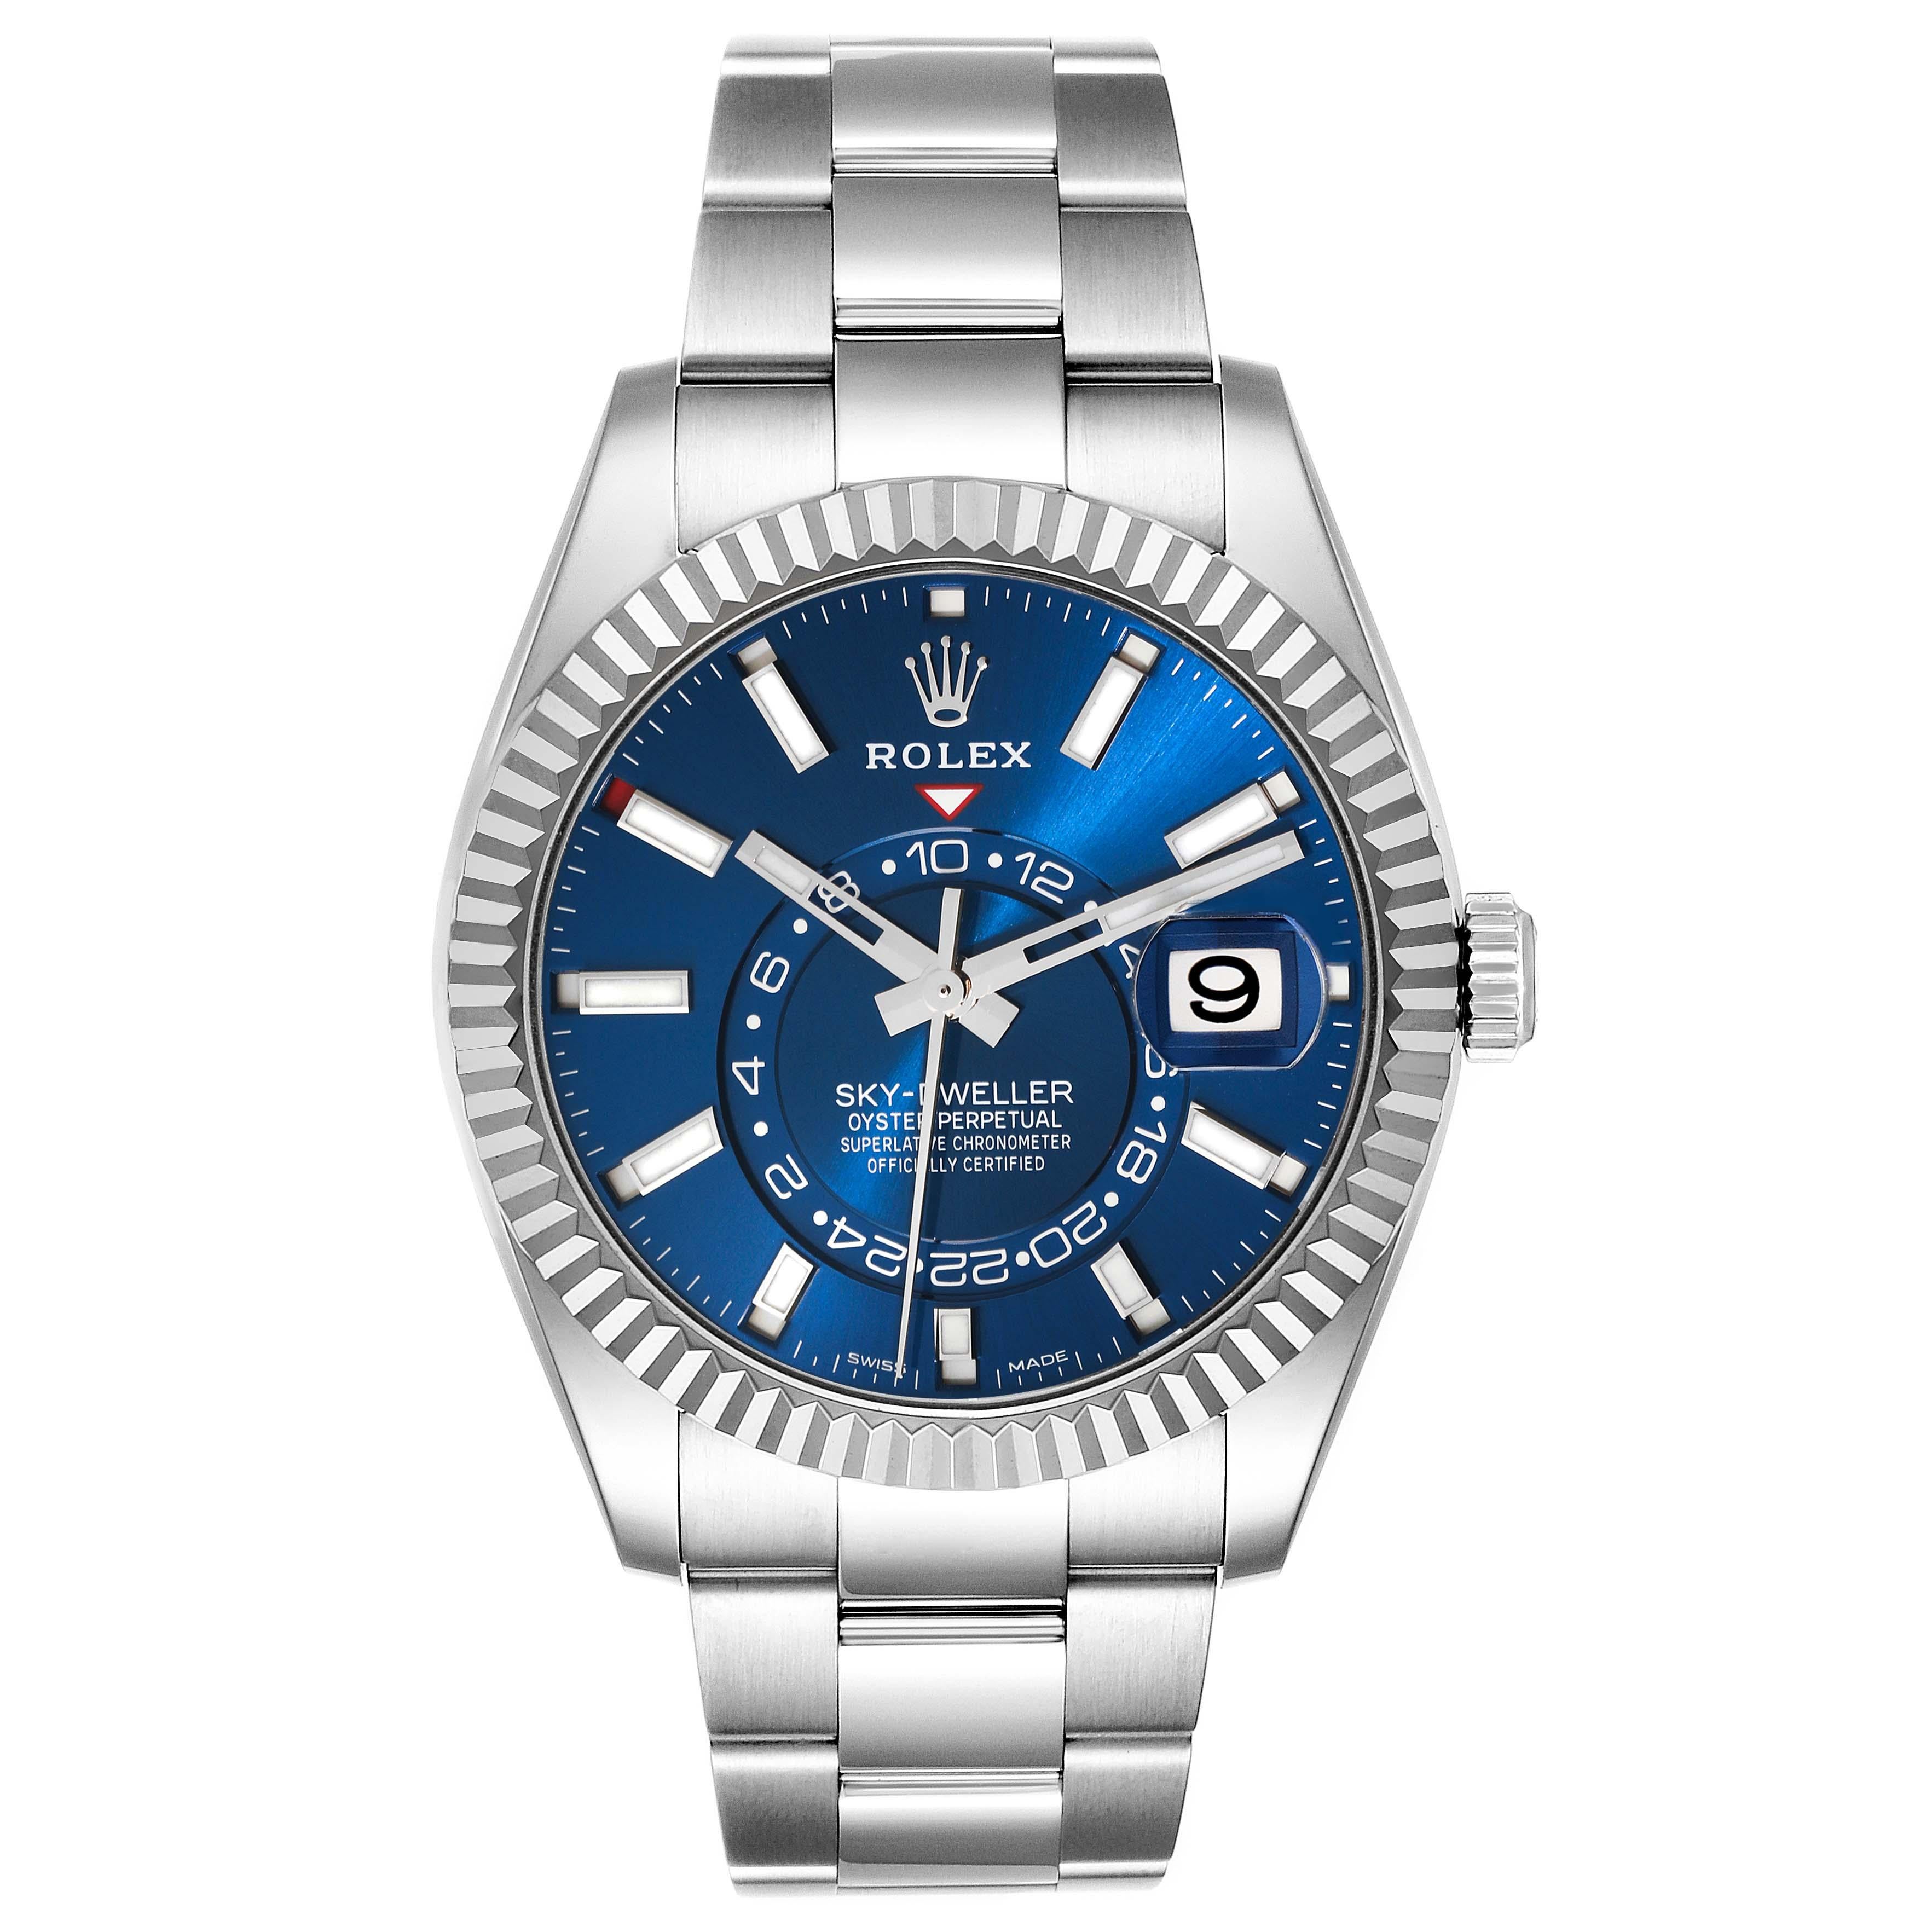 Rolex Sky-Dweller Blue Dial Steel White Gold Mens Watch 326934 Box Card. Officially certified chronometer automatic self-winding movement. Dual time zones, annual calendar. Paramagnetic blue Parachrom hairspring. High-performance Paraflex shock